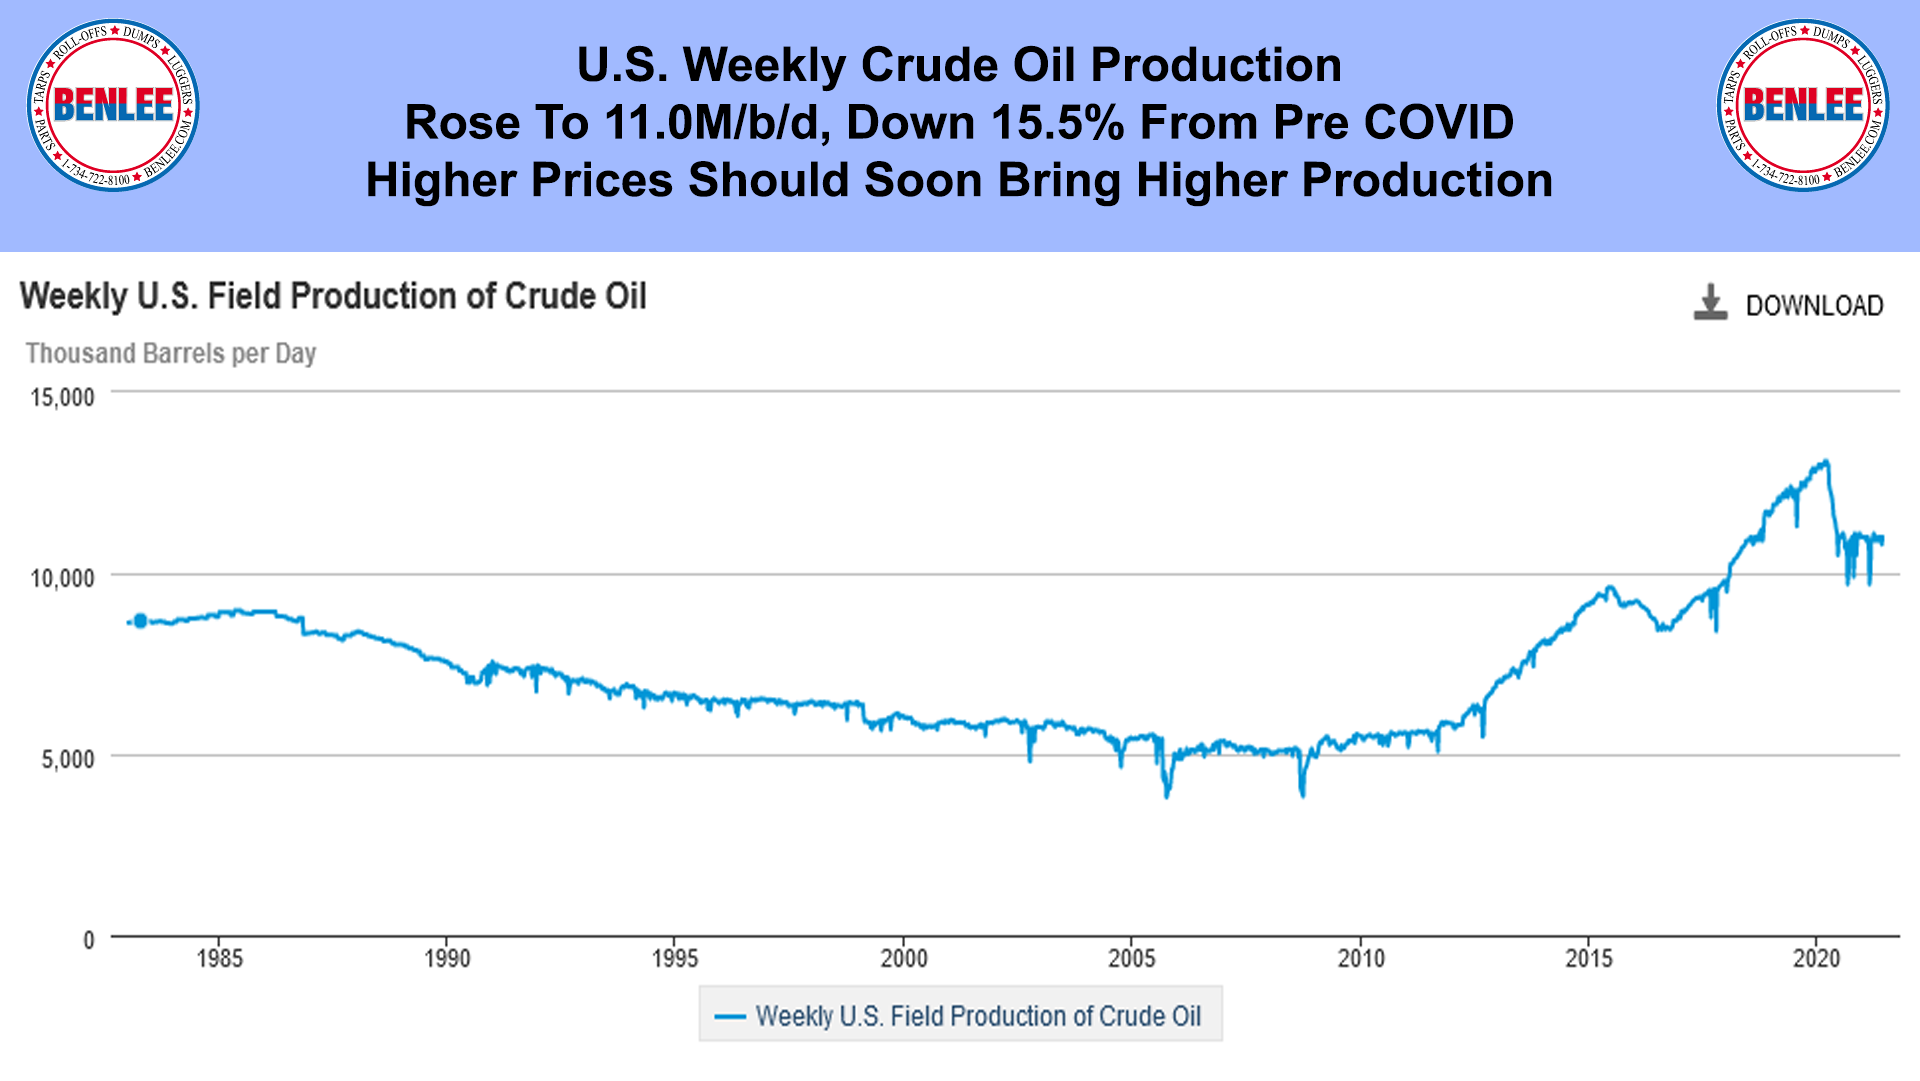 US Field Production of Crude Oil